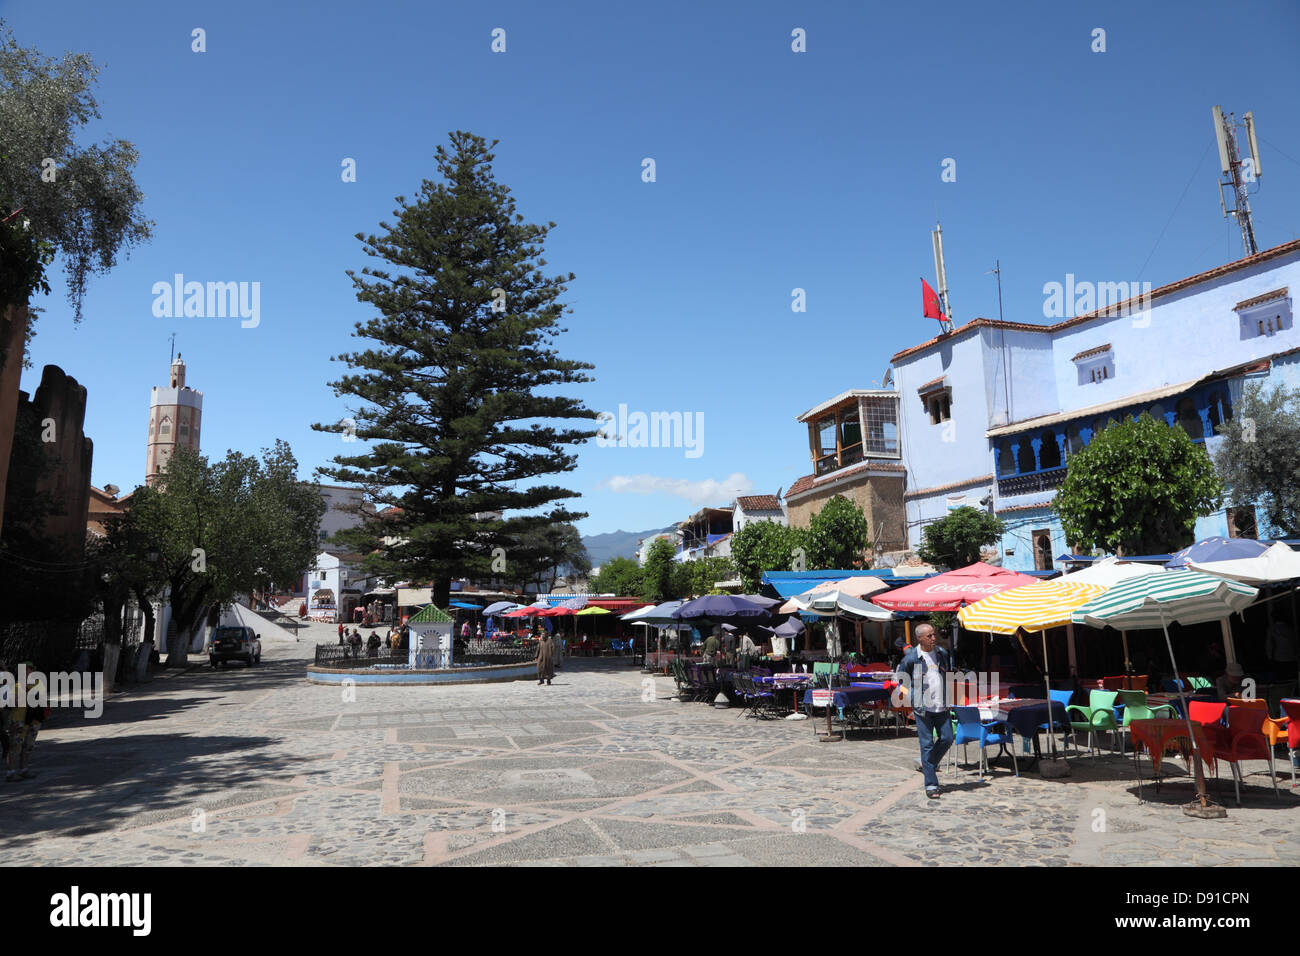 Square in the medina of Chefchaouen, Morocco Stock Photo